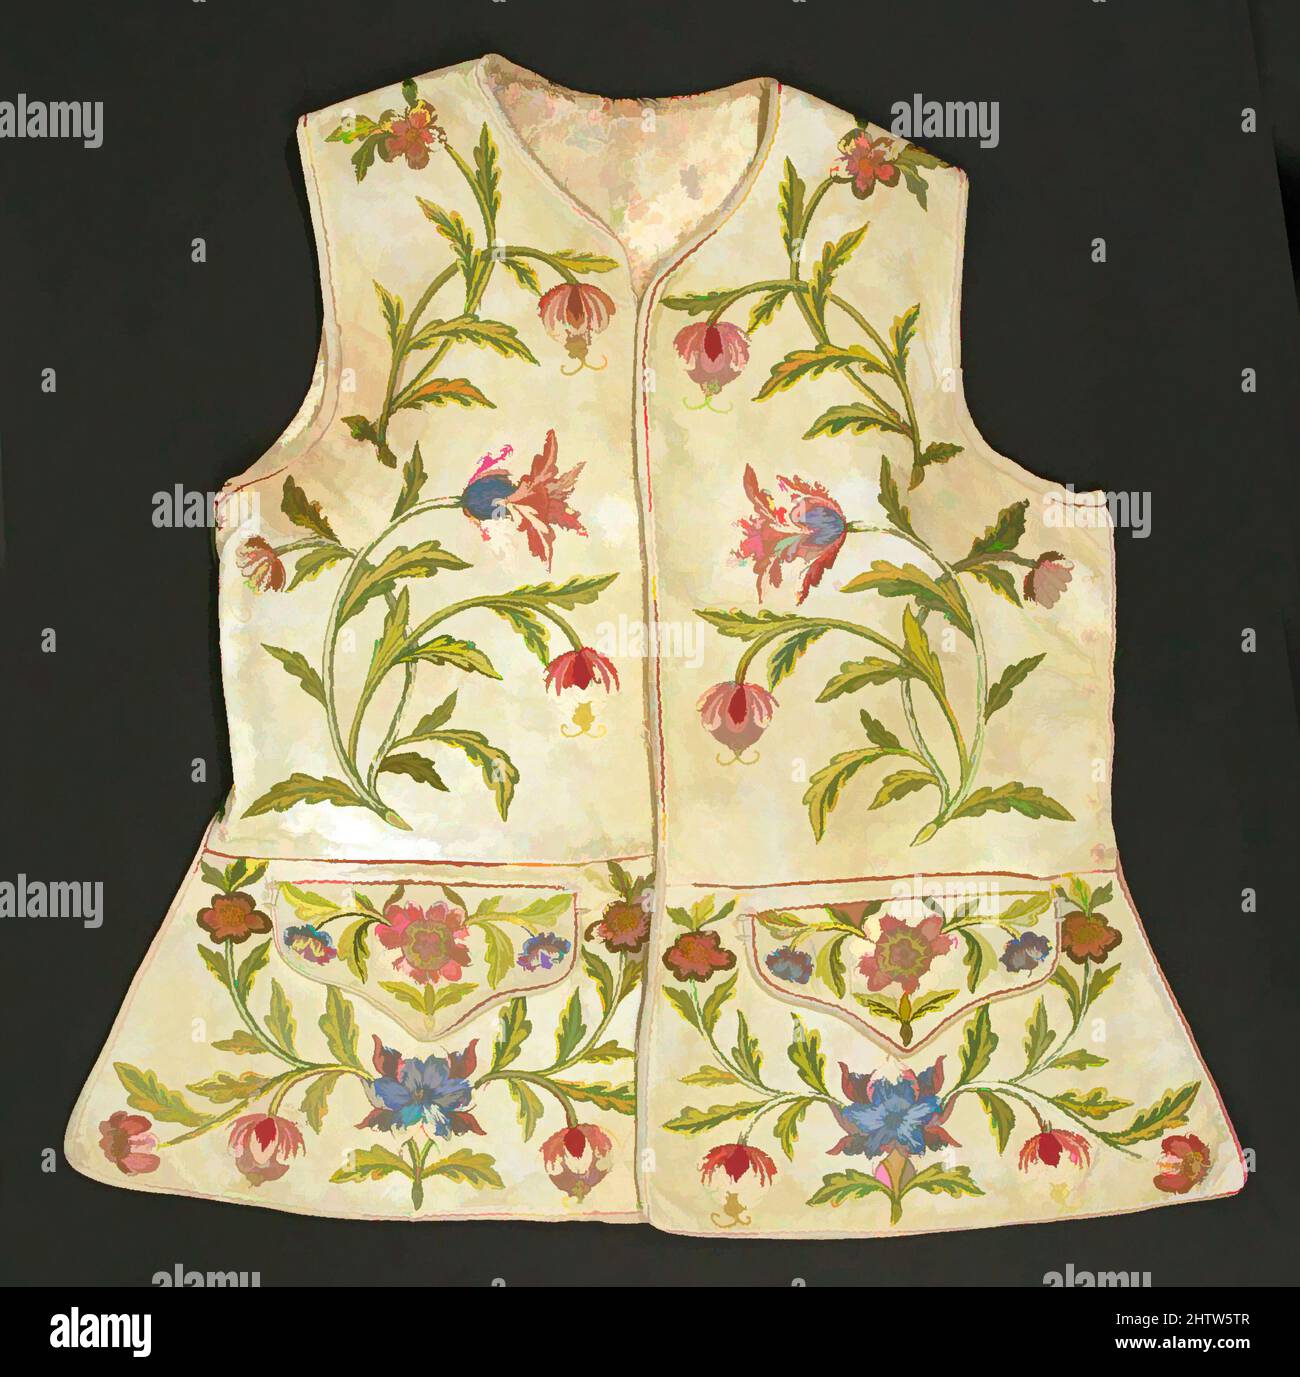 Art inspired by Vest, ca. 1750, American or European, doeskin, silk, Considering the formal code of etiquette that governed eighteenth-century life, it is not surprising that gentlemen did not generally remove their jackets in public. Tailors made men’s waistcoats of the most beautiful, Classic works modernized by Artotop with a splash of modernity. Shapes, color and value, eye-catching visual impact on art. Emotions through freedom of artworks in a contemporary way. A timeless message pursuing a wildly creative new direction. Artists turning to the digital medium and creating the Artotop NFT Stock Photo